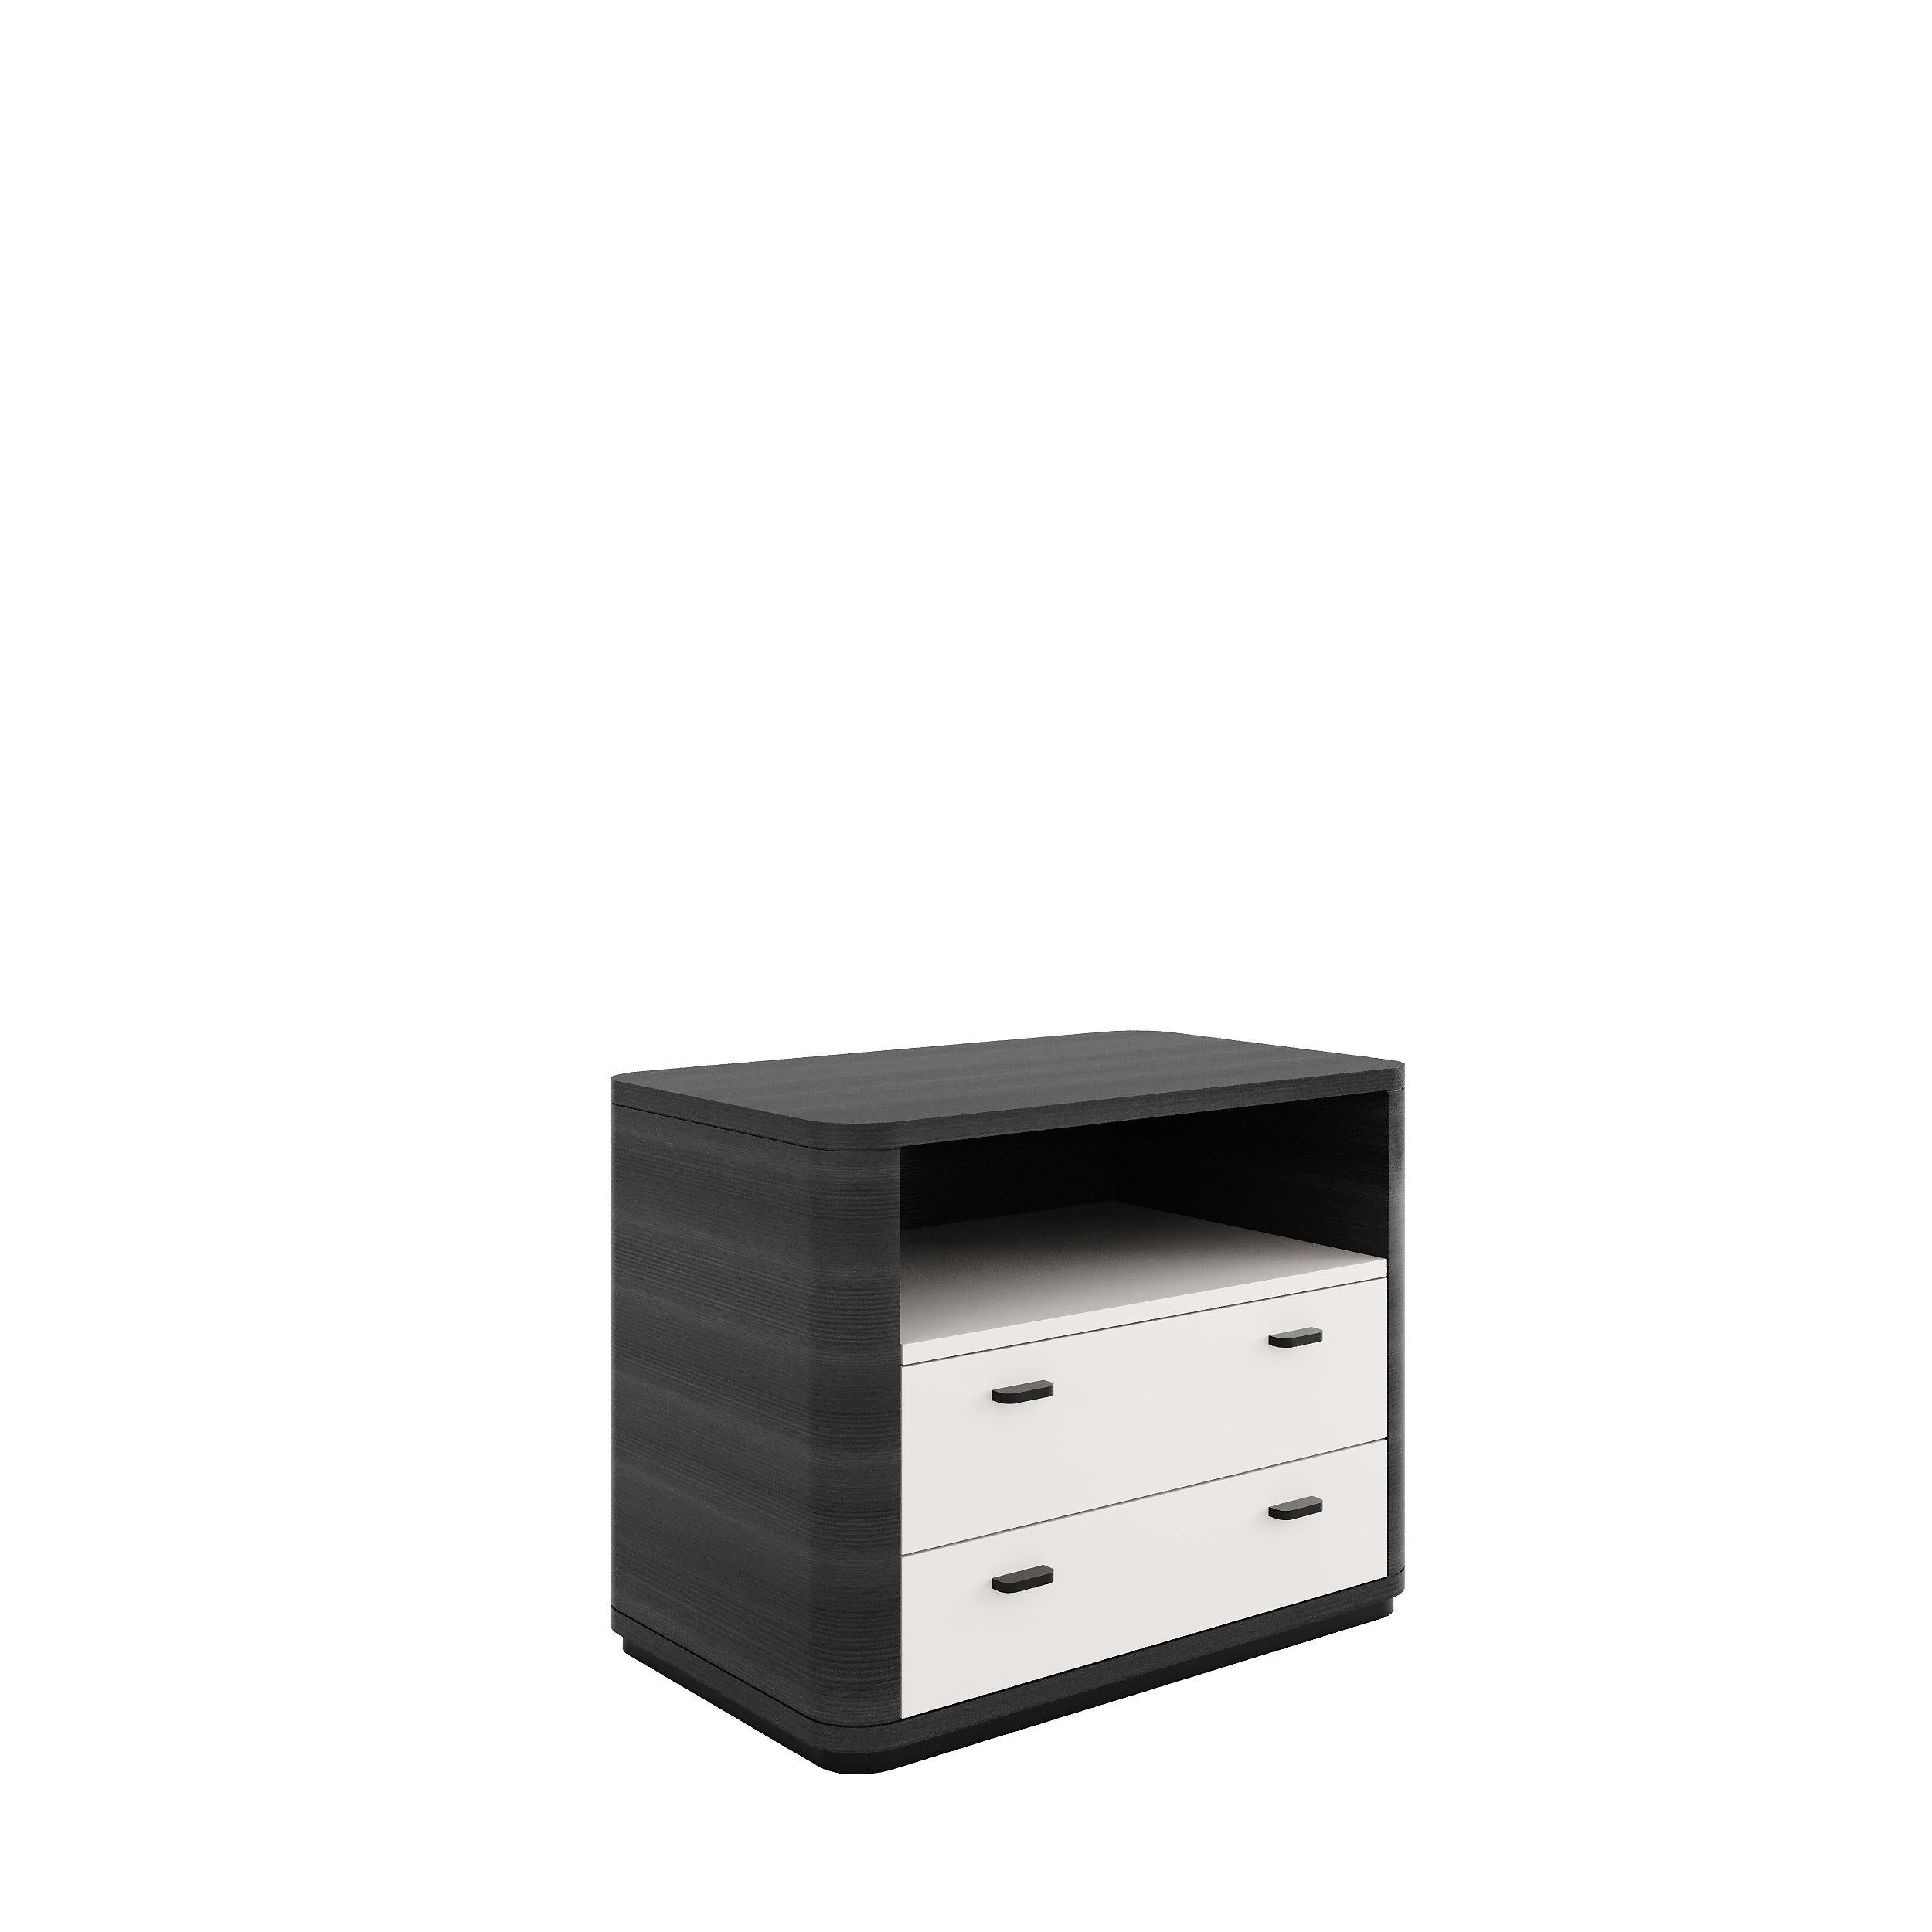 Robust and at the same time very elegant, the Cris bedside table is suitable for bedrooms with classic or contemporary style.‎ Cris, equipped with 2 drawers and an open unit, finished in matte or glossy lacquer or veneered wood. Antique Brass,